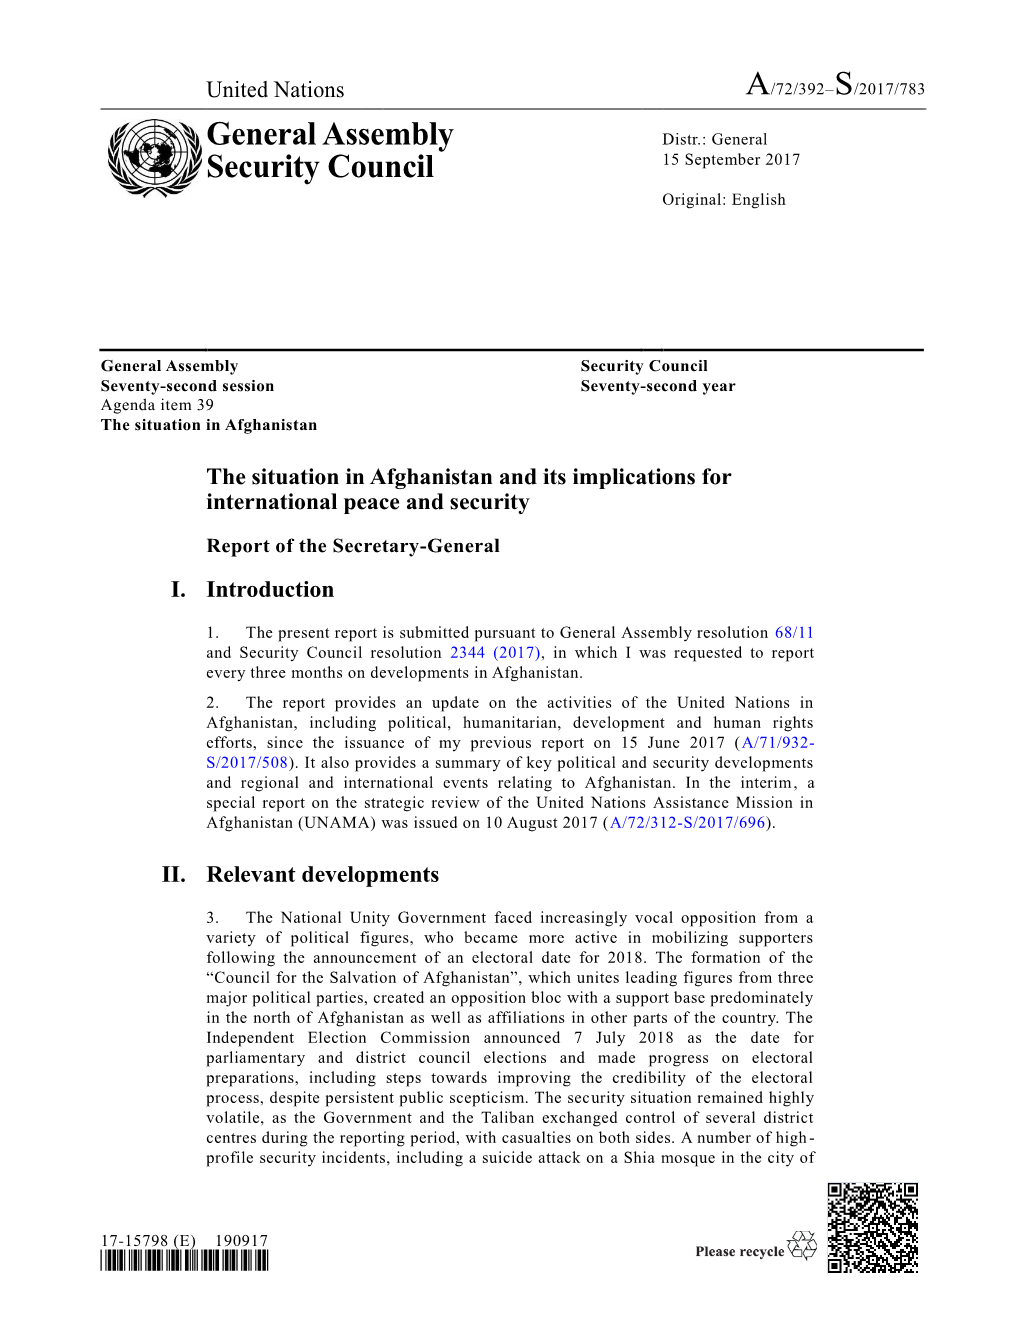 General Assembly Security Council Seventy-Second Session Seventy-Second Year Agenda Item 39 the Situation in Afghanistan